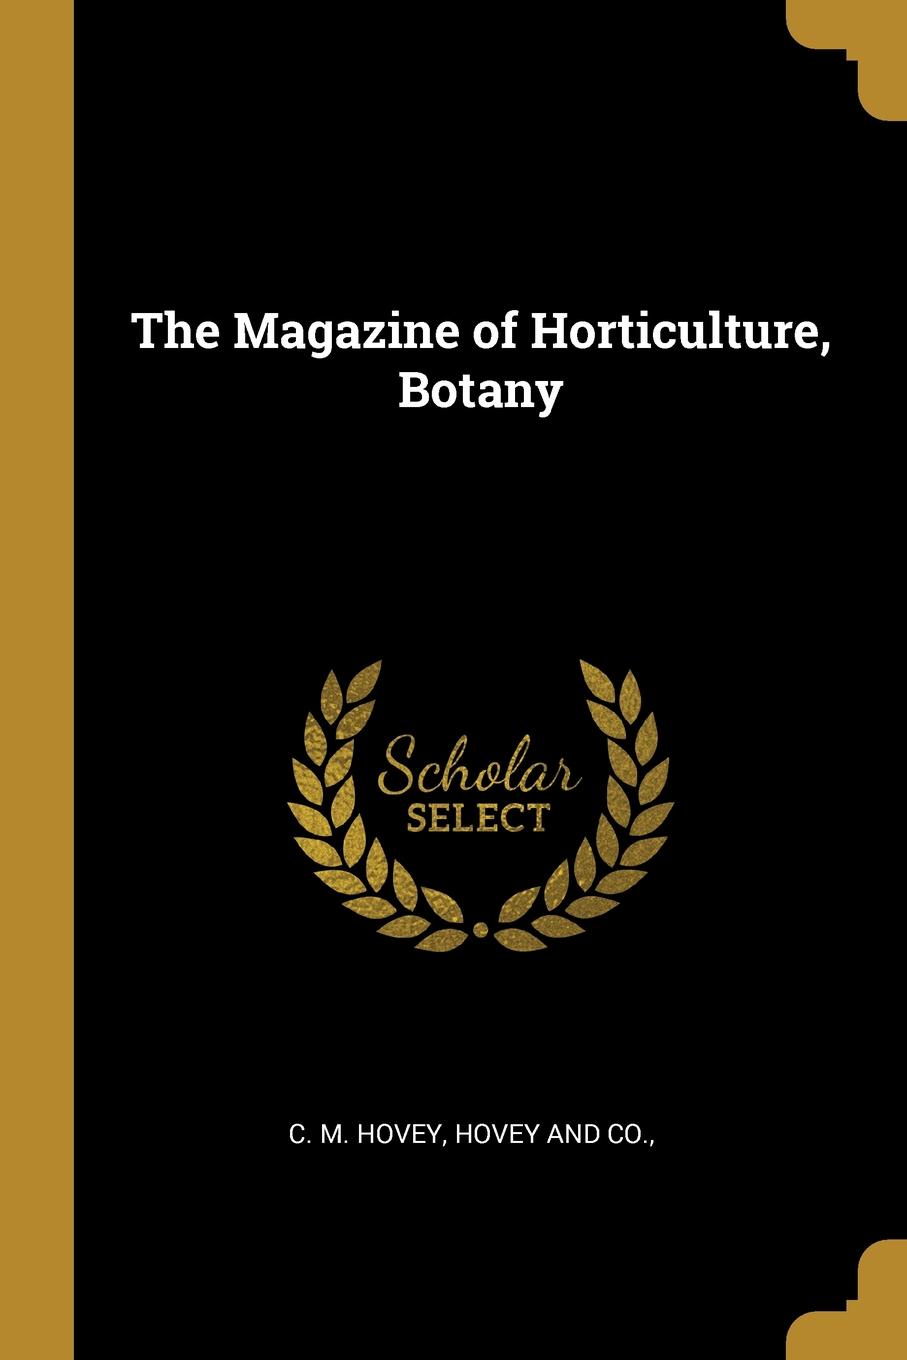 The Magazine of Horticulture, Botany